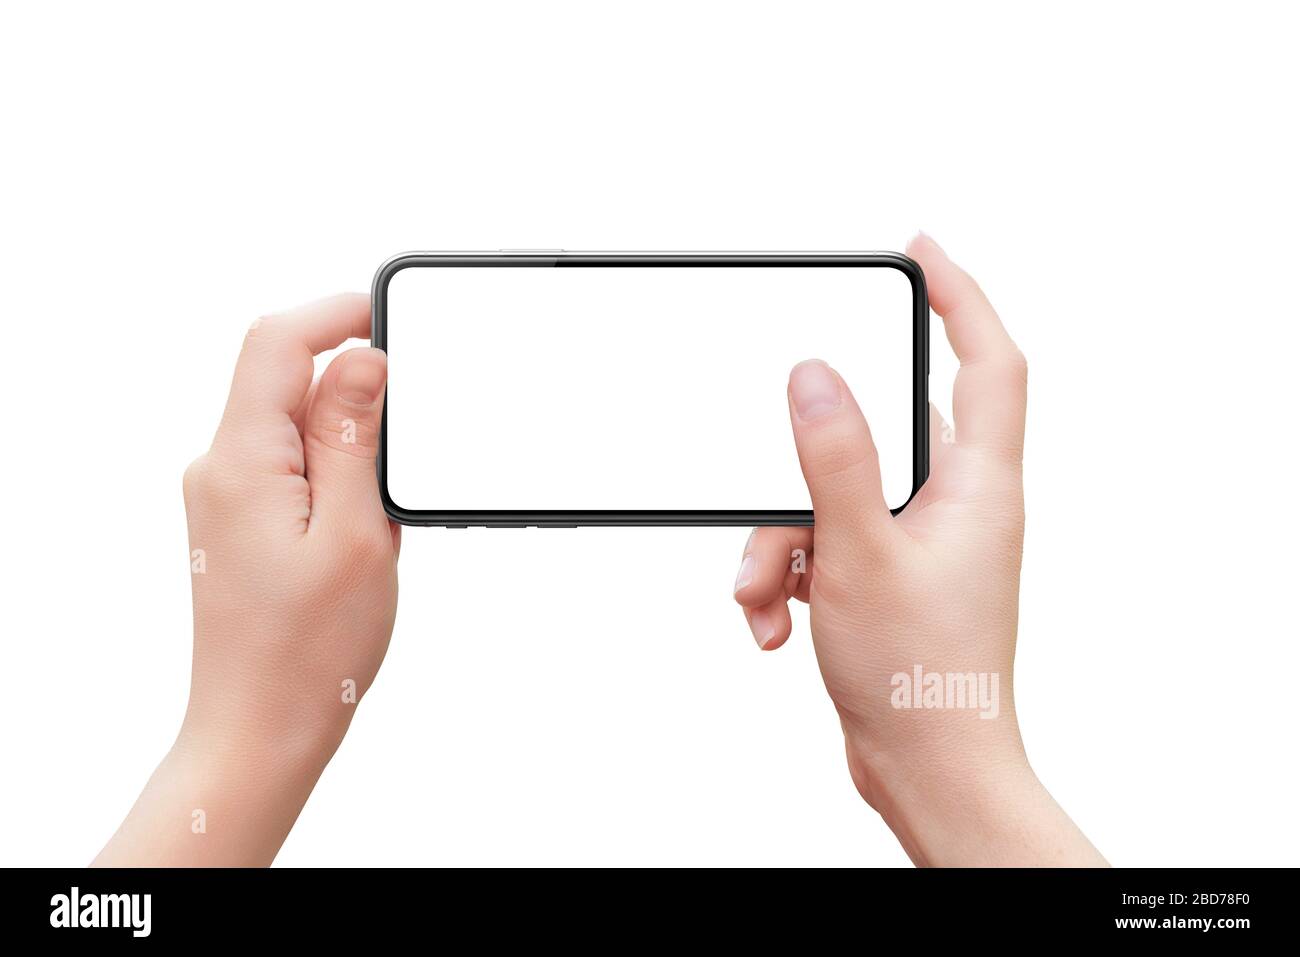 Phohe mockup in woman hands. Horizontal position. Concept of camera or app use with finger on screen. Isolated background Stock Photo